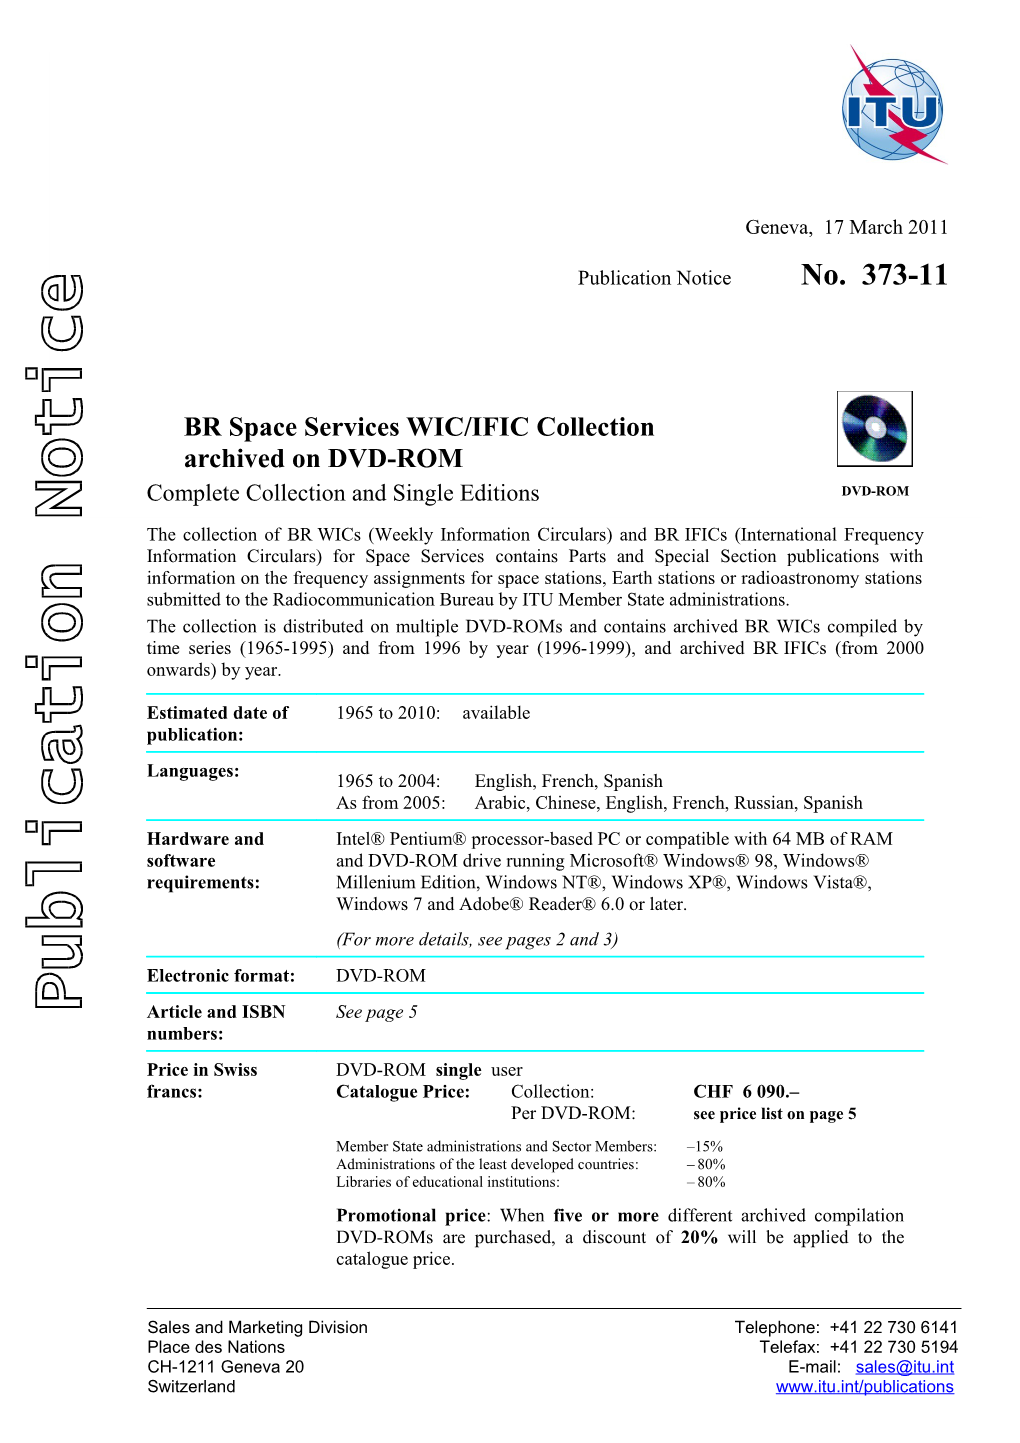 Publication Notice No. 373-09 BR Space Services WIC / IFIC - Collection Archived on DVD-ROM